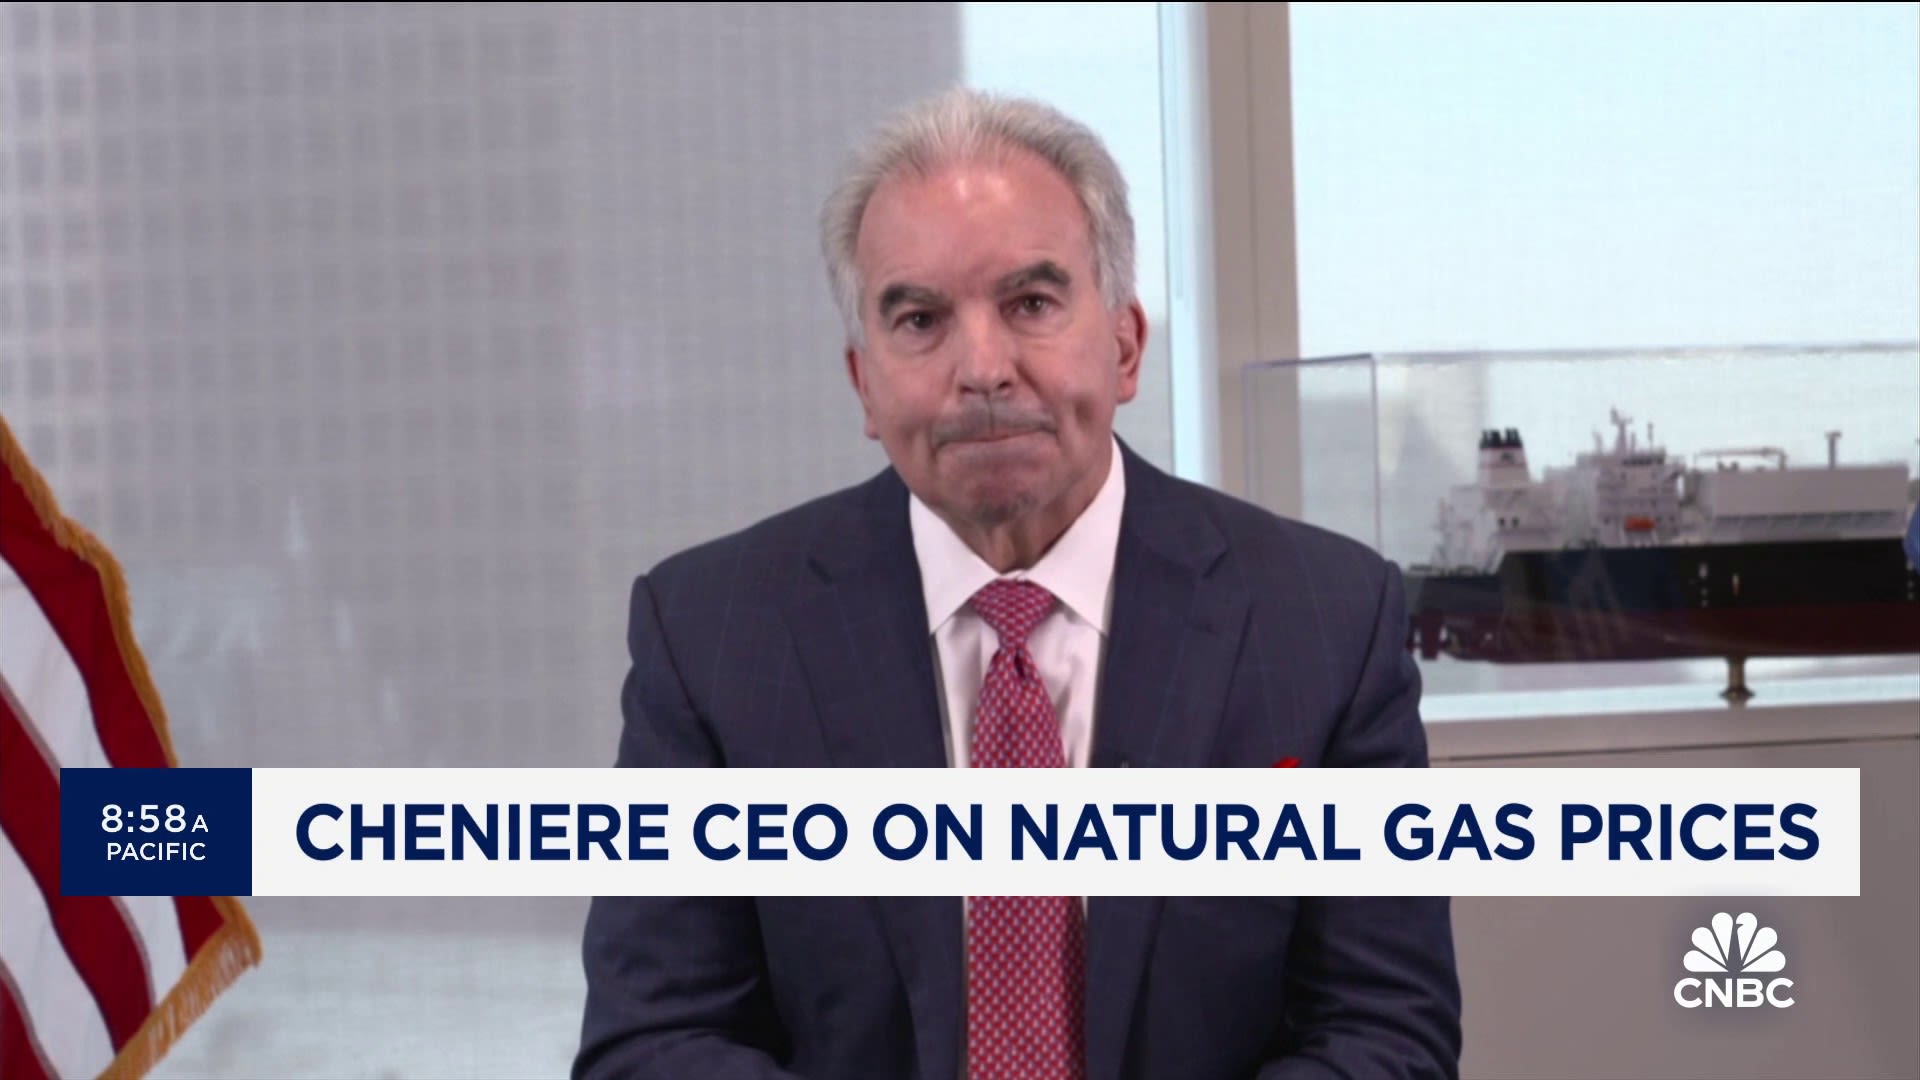 Global demand for LNG is ''off the charts'': Cheniere Energy CEO